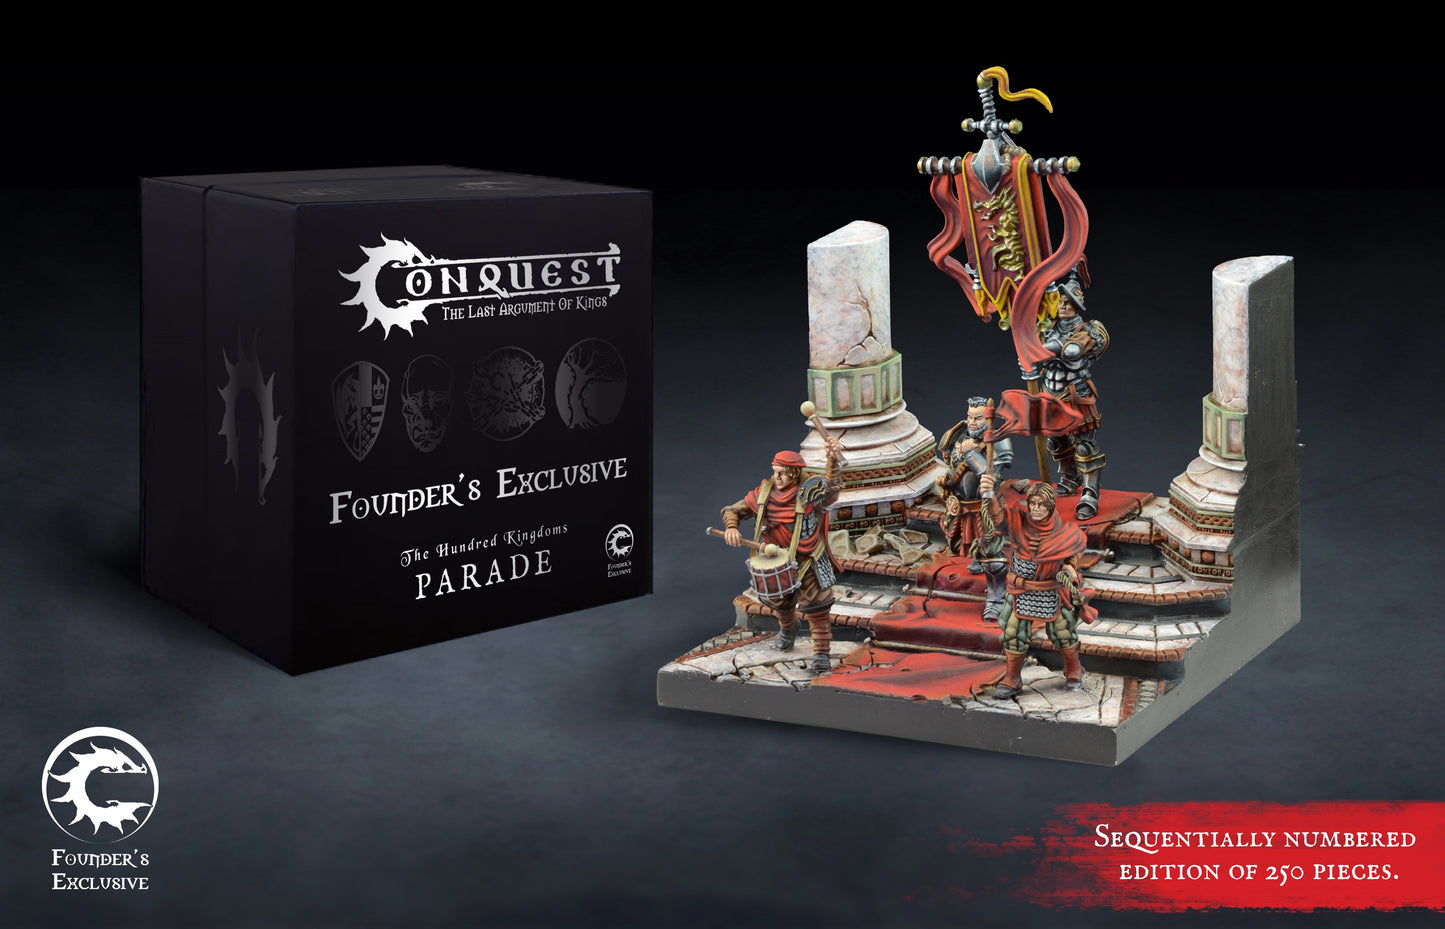 Hundred Kingdoms: Parade Retinue Founder's Exclusive Edition Conquest - The Last Argument of Kings Aetherworks   